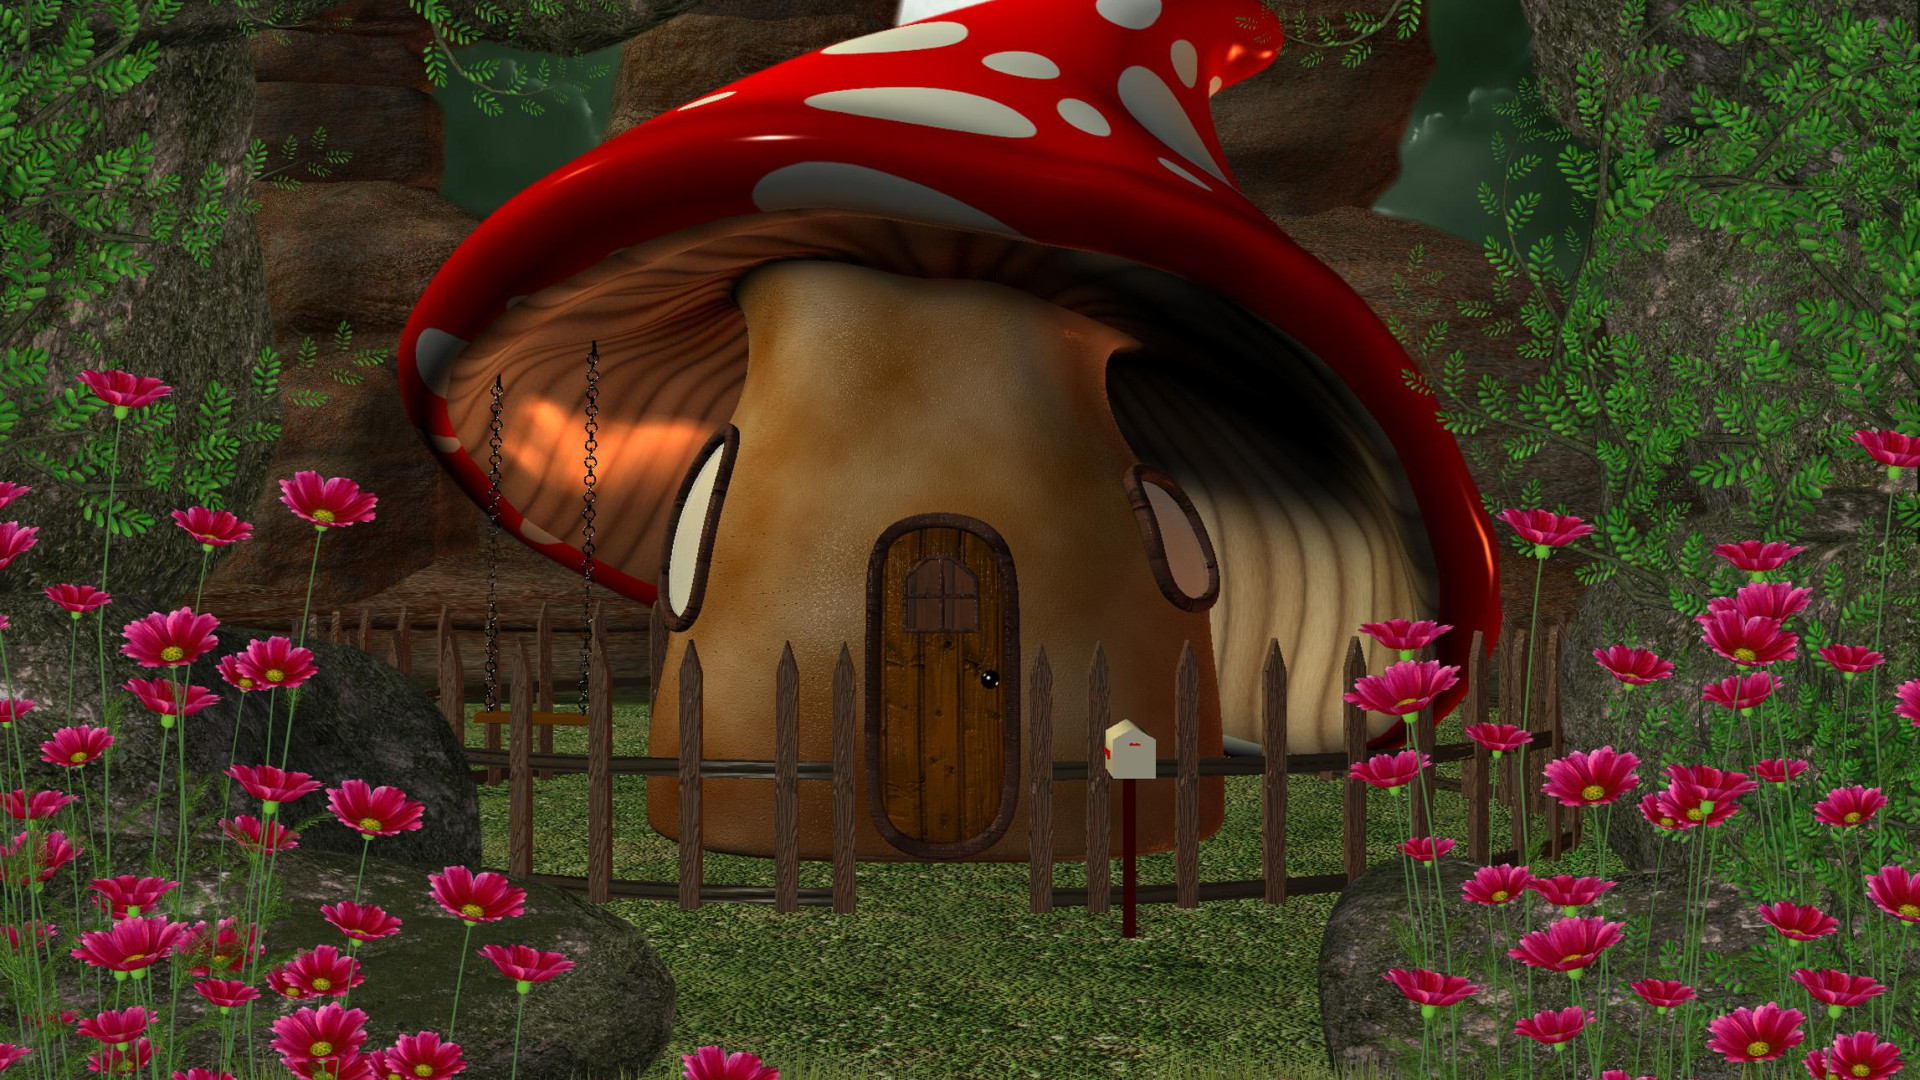 Mushroom House in the Forest HD Wallpaper